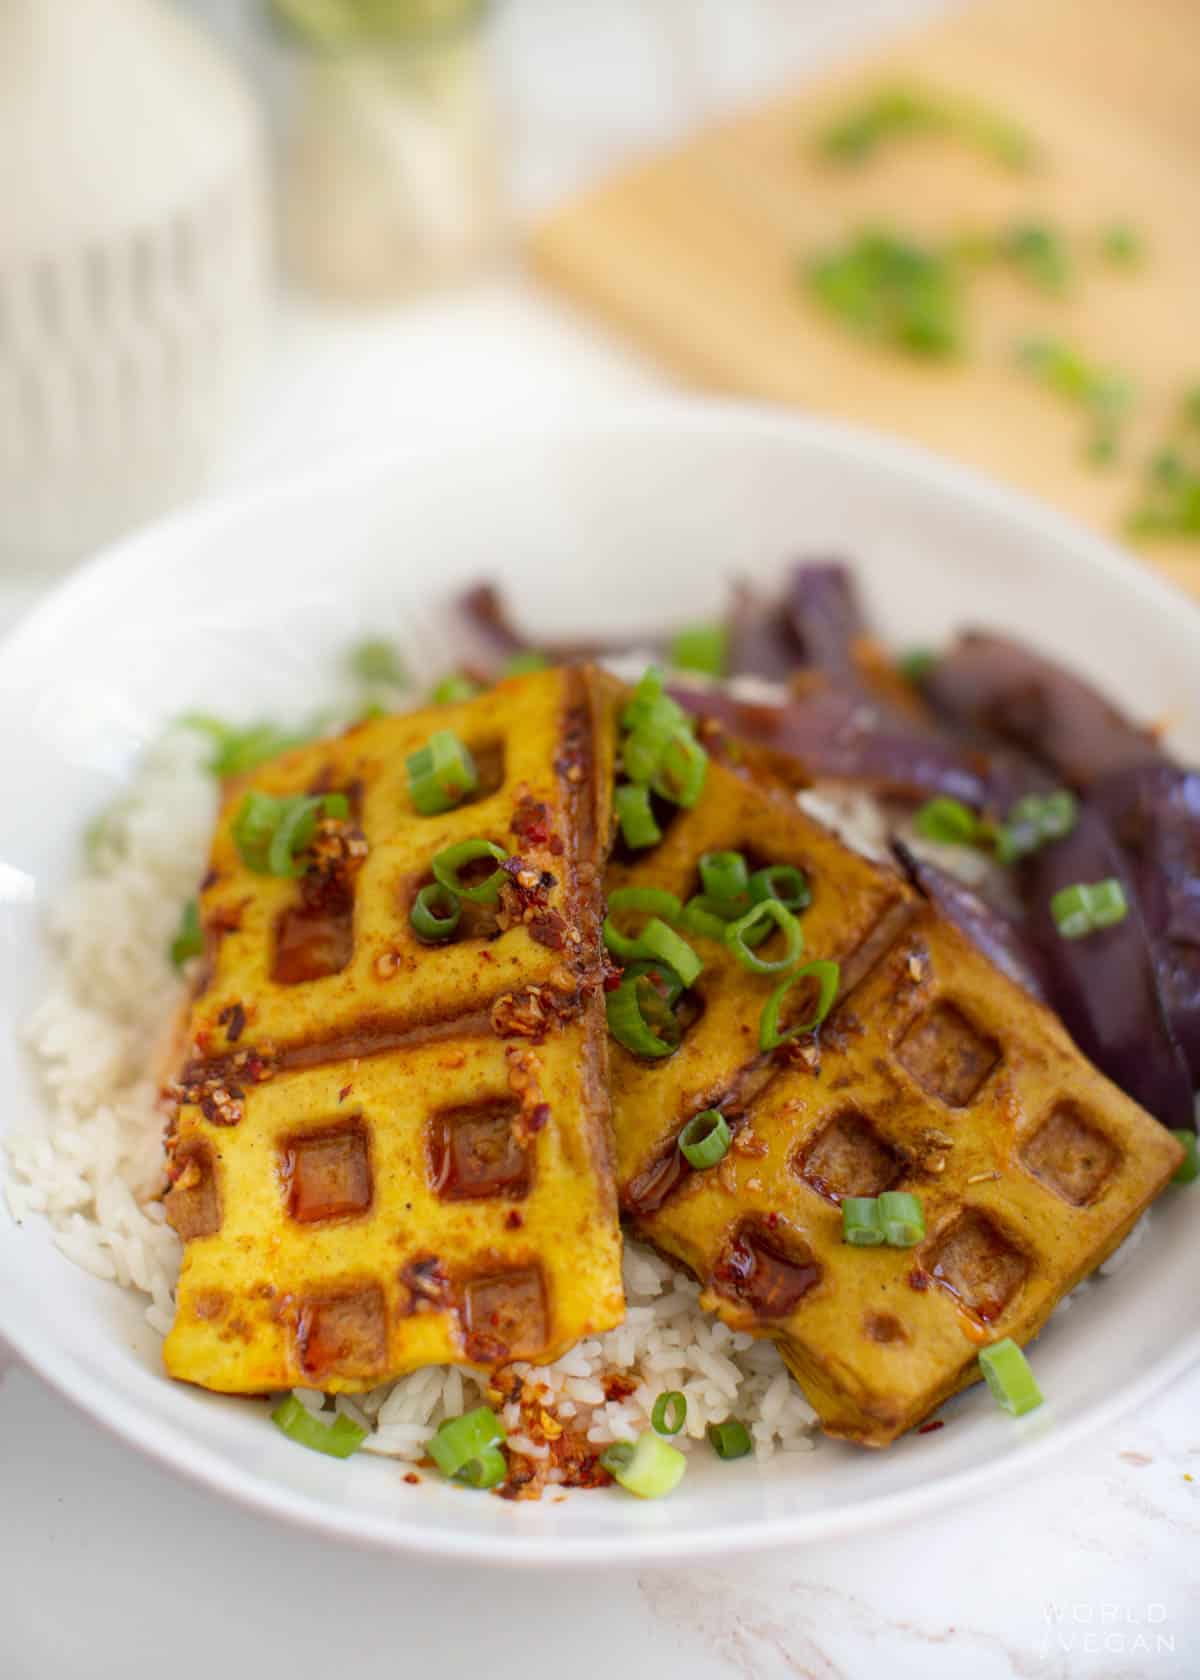 Waffles made out of tofu pressed in a belgian waffle iron served over rice and garnished with green onions. 